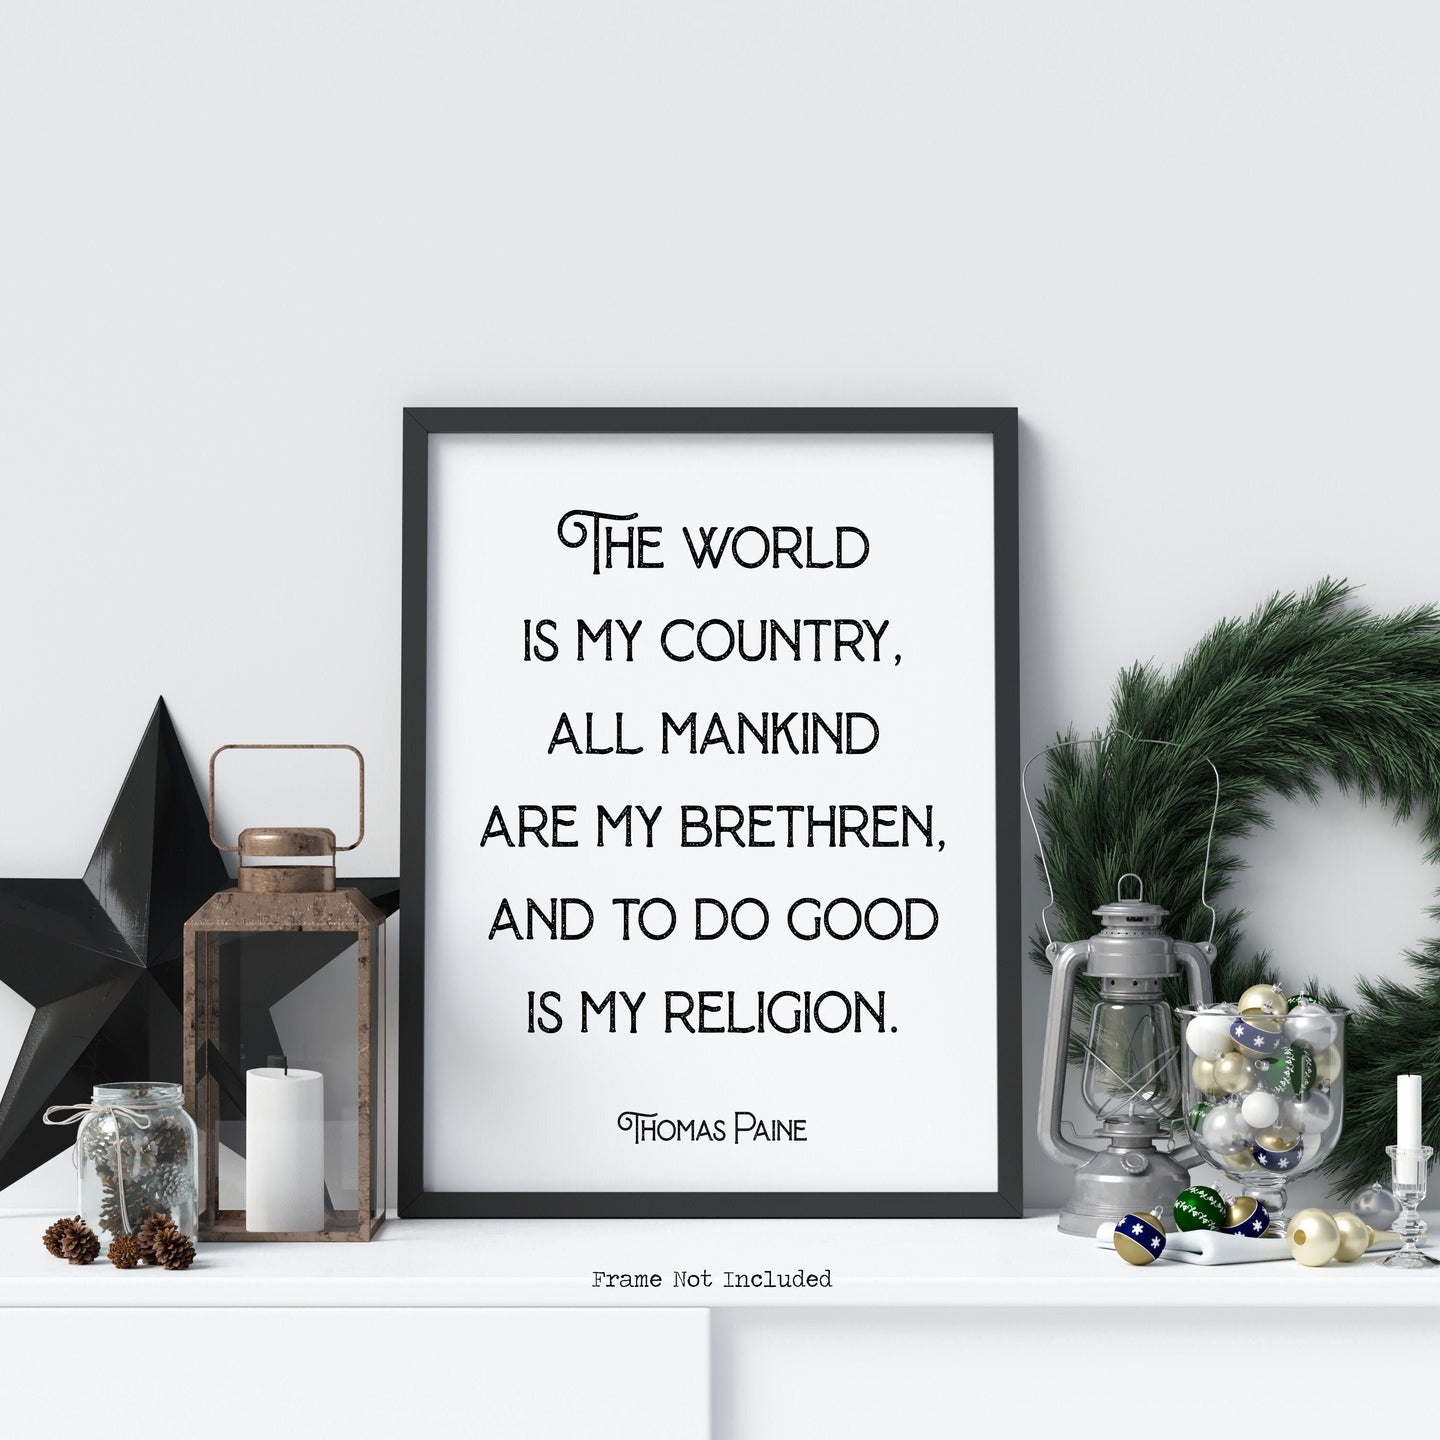 Thomas Paine quote - The world is my country, all mankind are my brethren, and to do good is my religion - Office Wall art - UNFRAMED